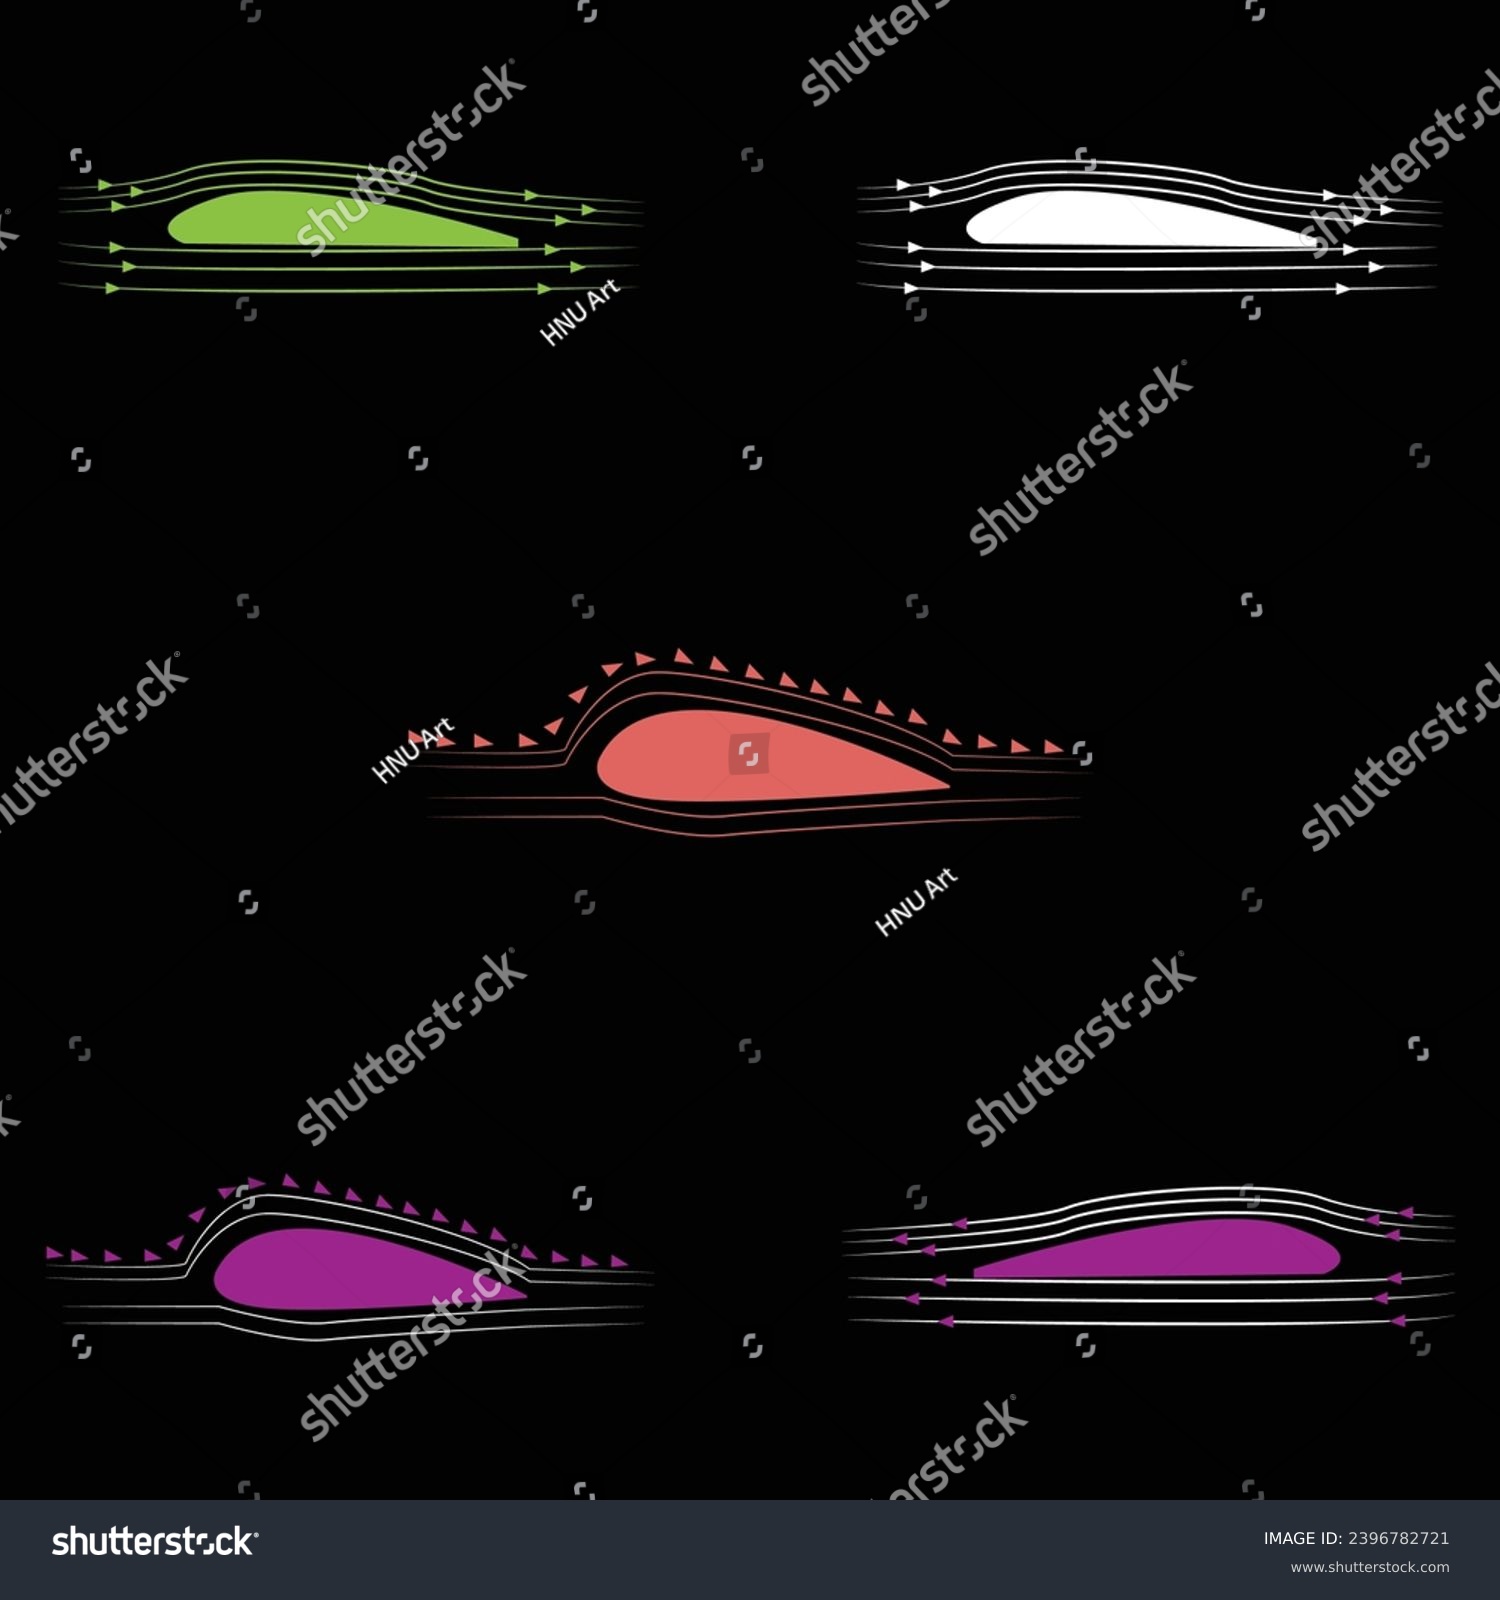 SVG of Plane wing shape design lift drag force flaps wind air flow physics angle of attack Newton laws Bernoulli fly drop dynamics crash cross section. svg